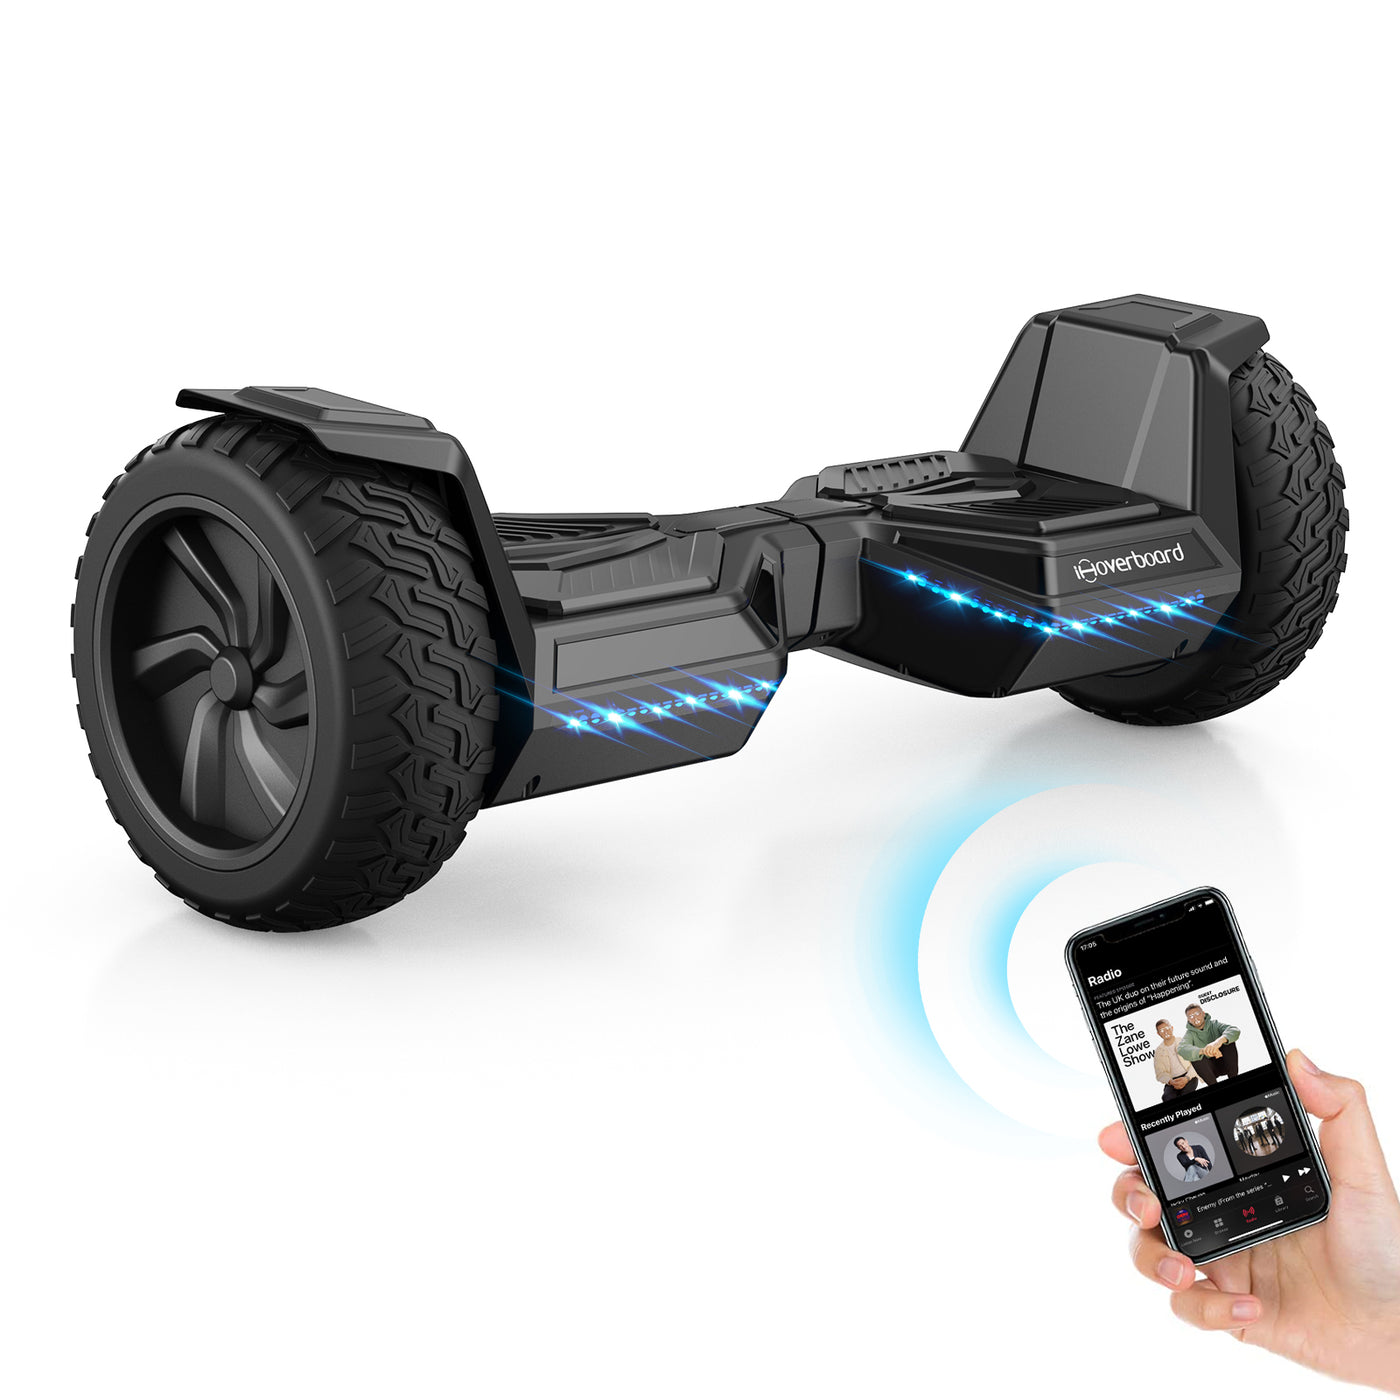 iHoverboard H8 Silver Off Road Hoverboard 8.5"